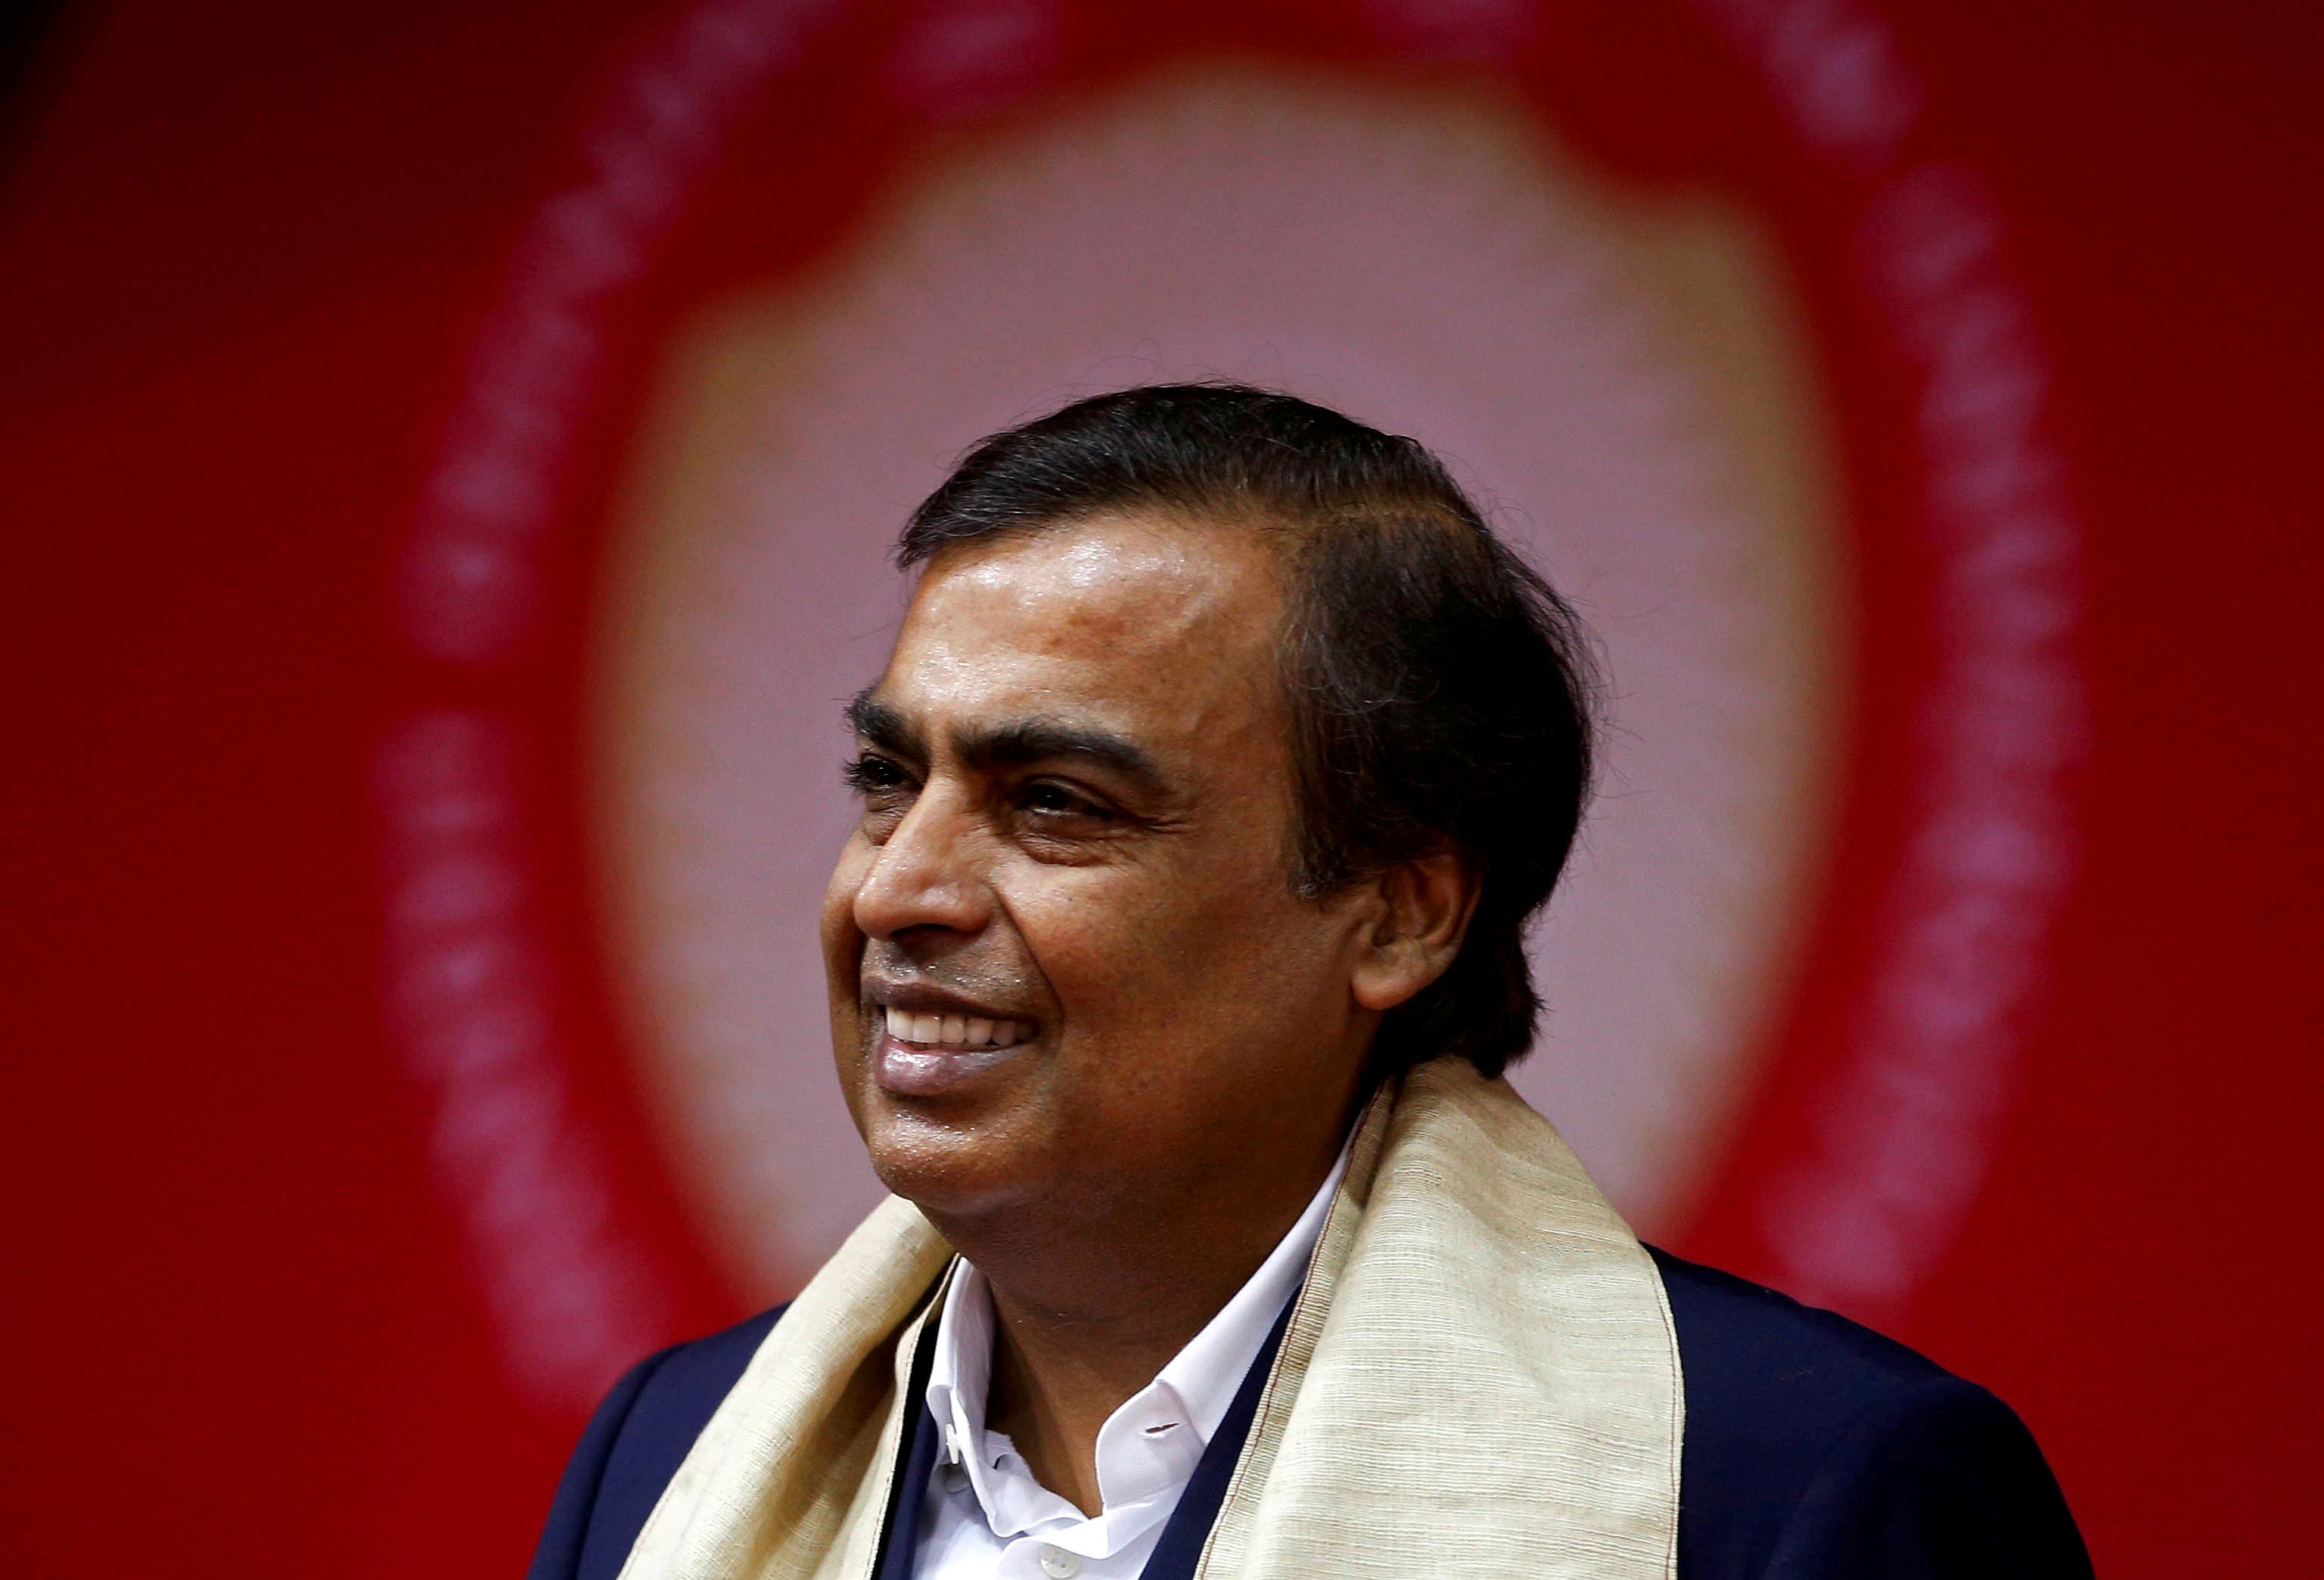 Pret A Manger in India: Mukesh Ambani's Reliance brings in British coffee  and sandwich chain